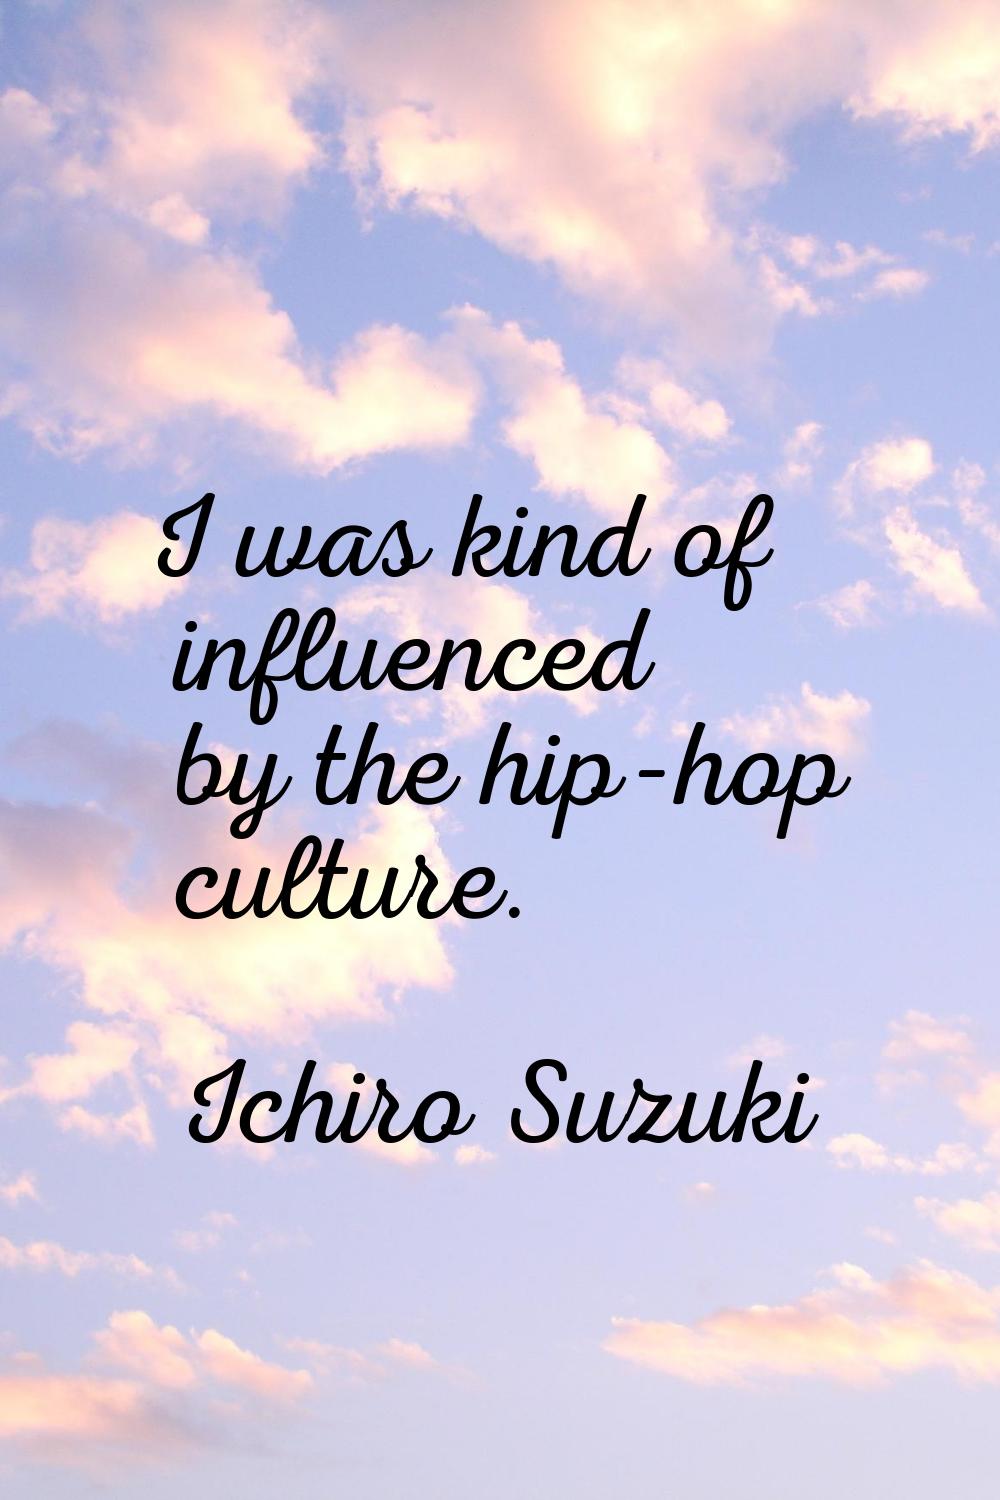 I was kind of influenced by the hip-hop culture.